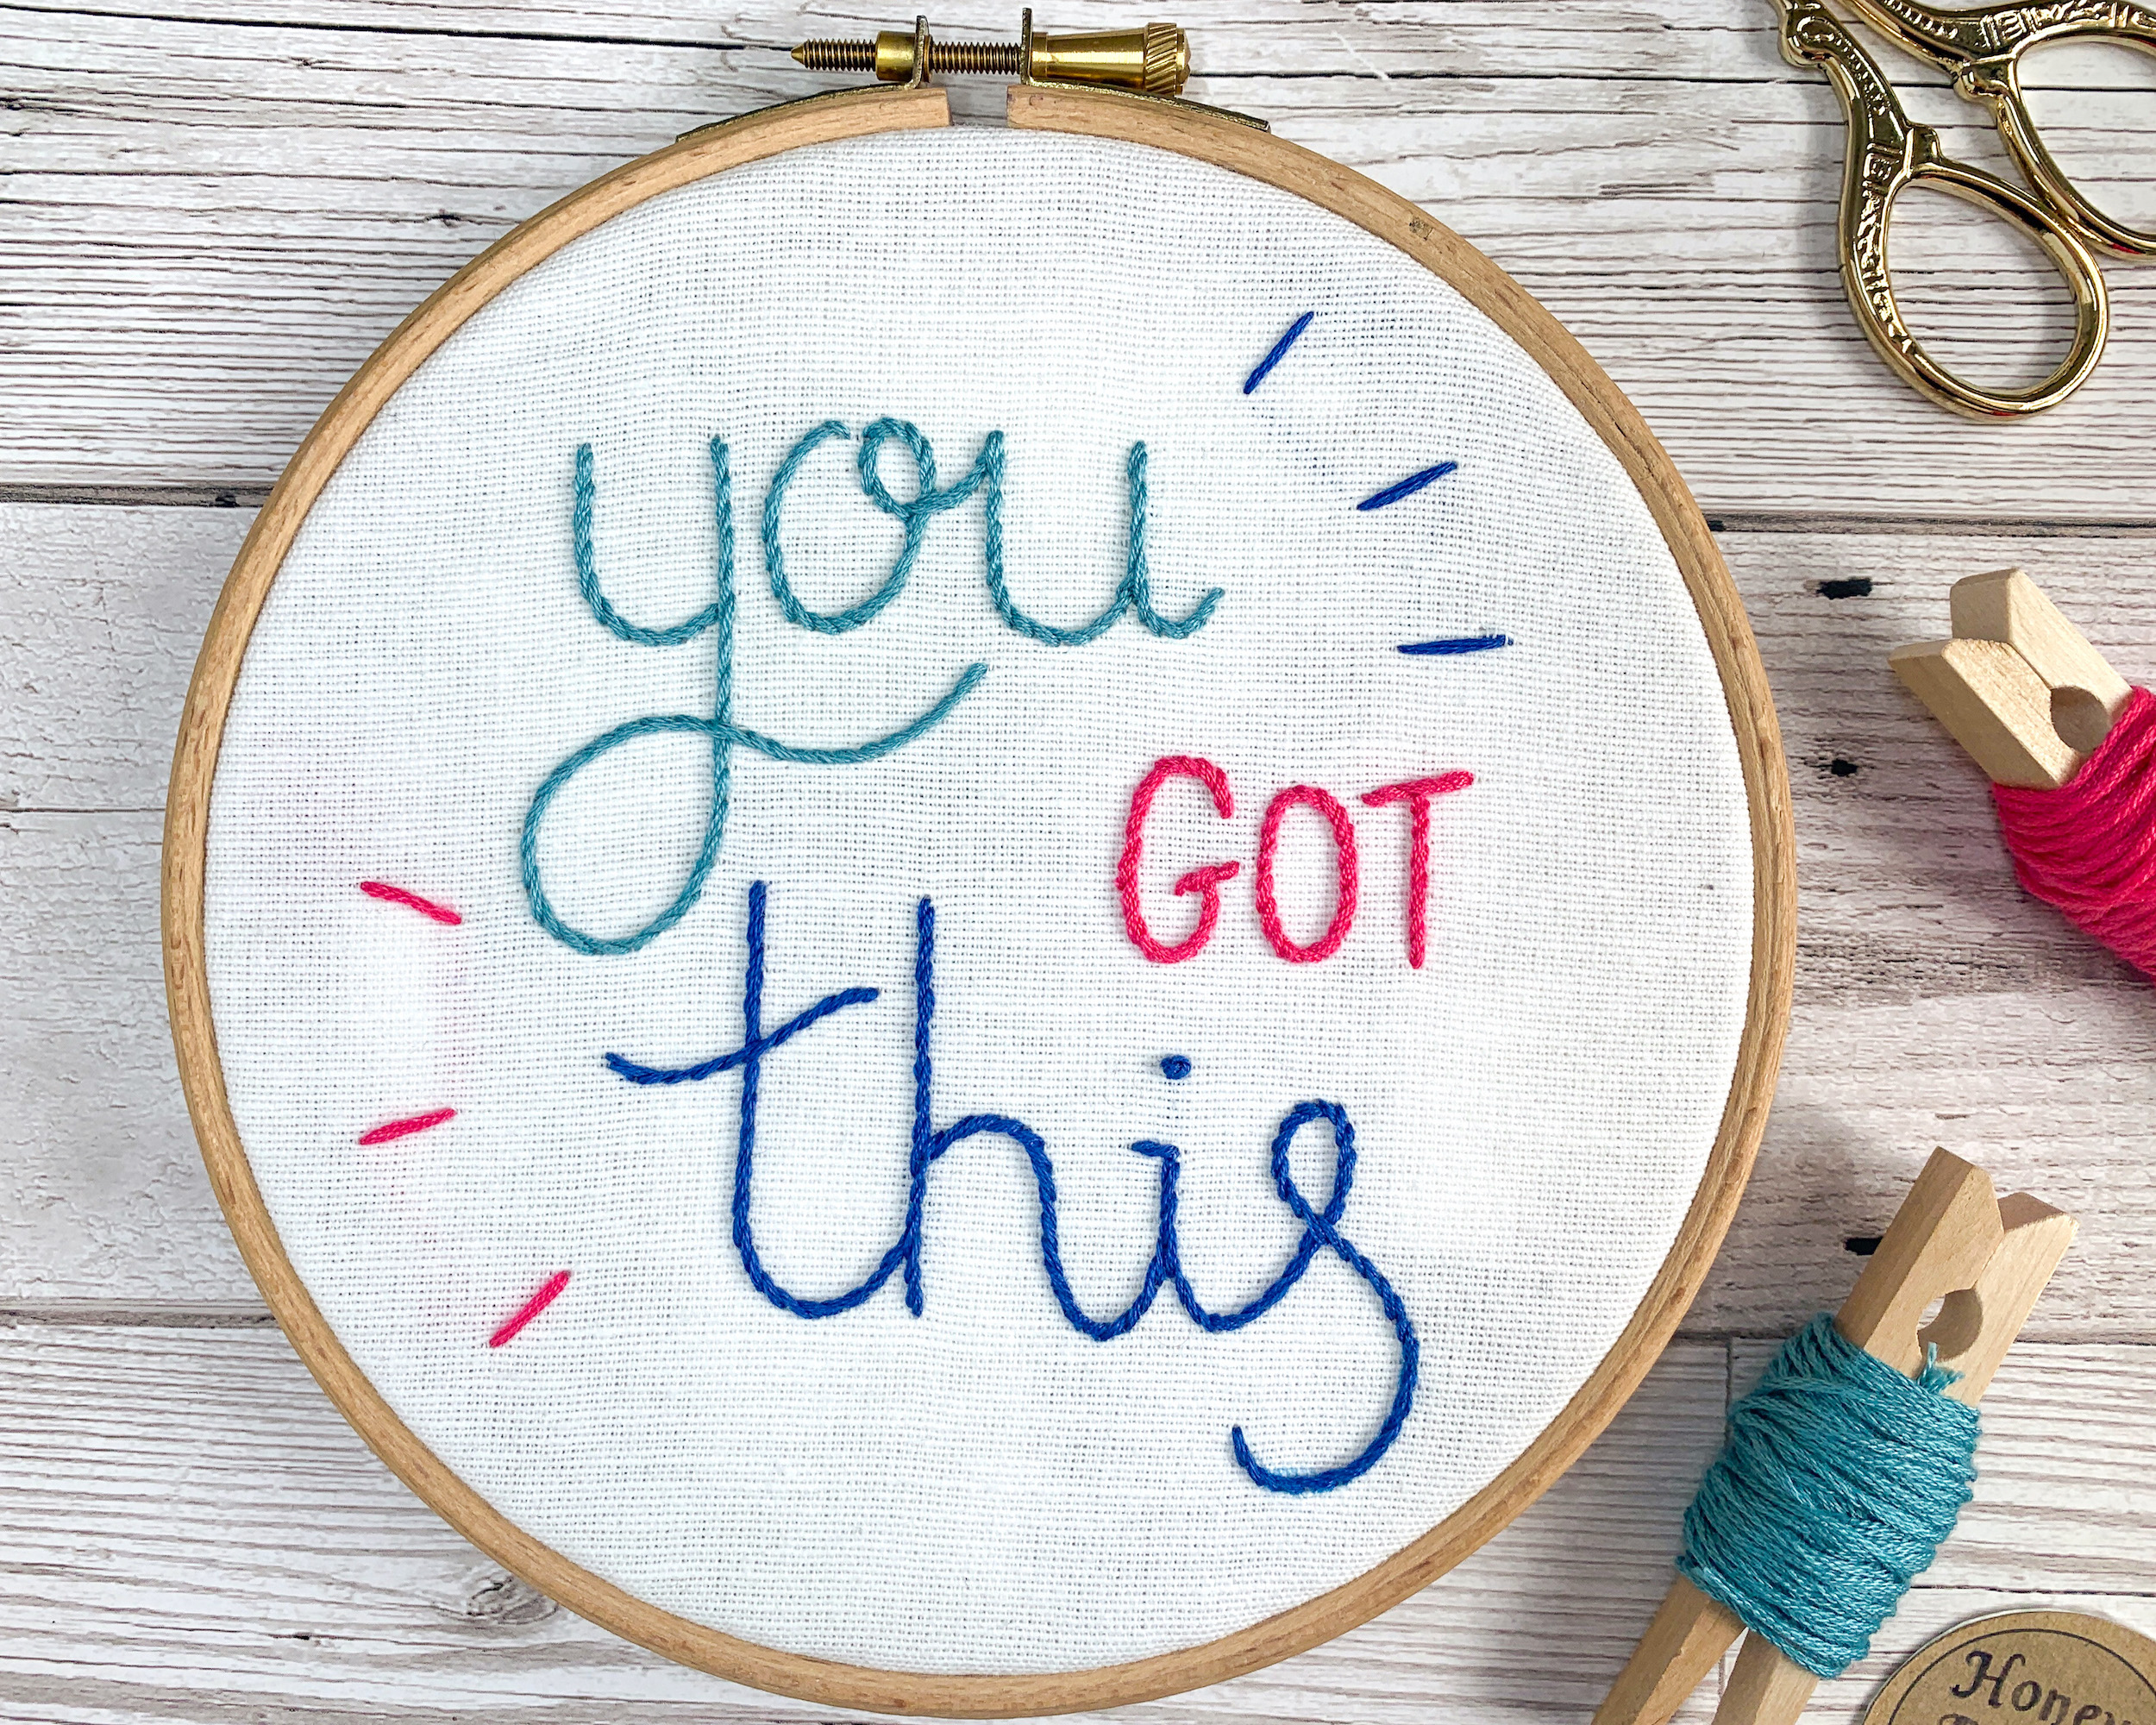 Honey Rhubarb, You got this hand embroidery hoop